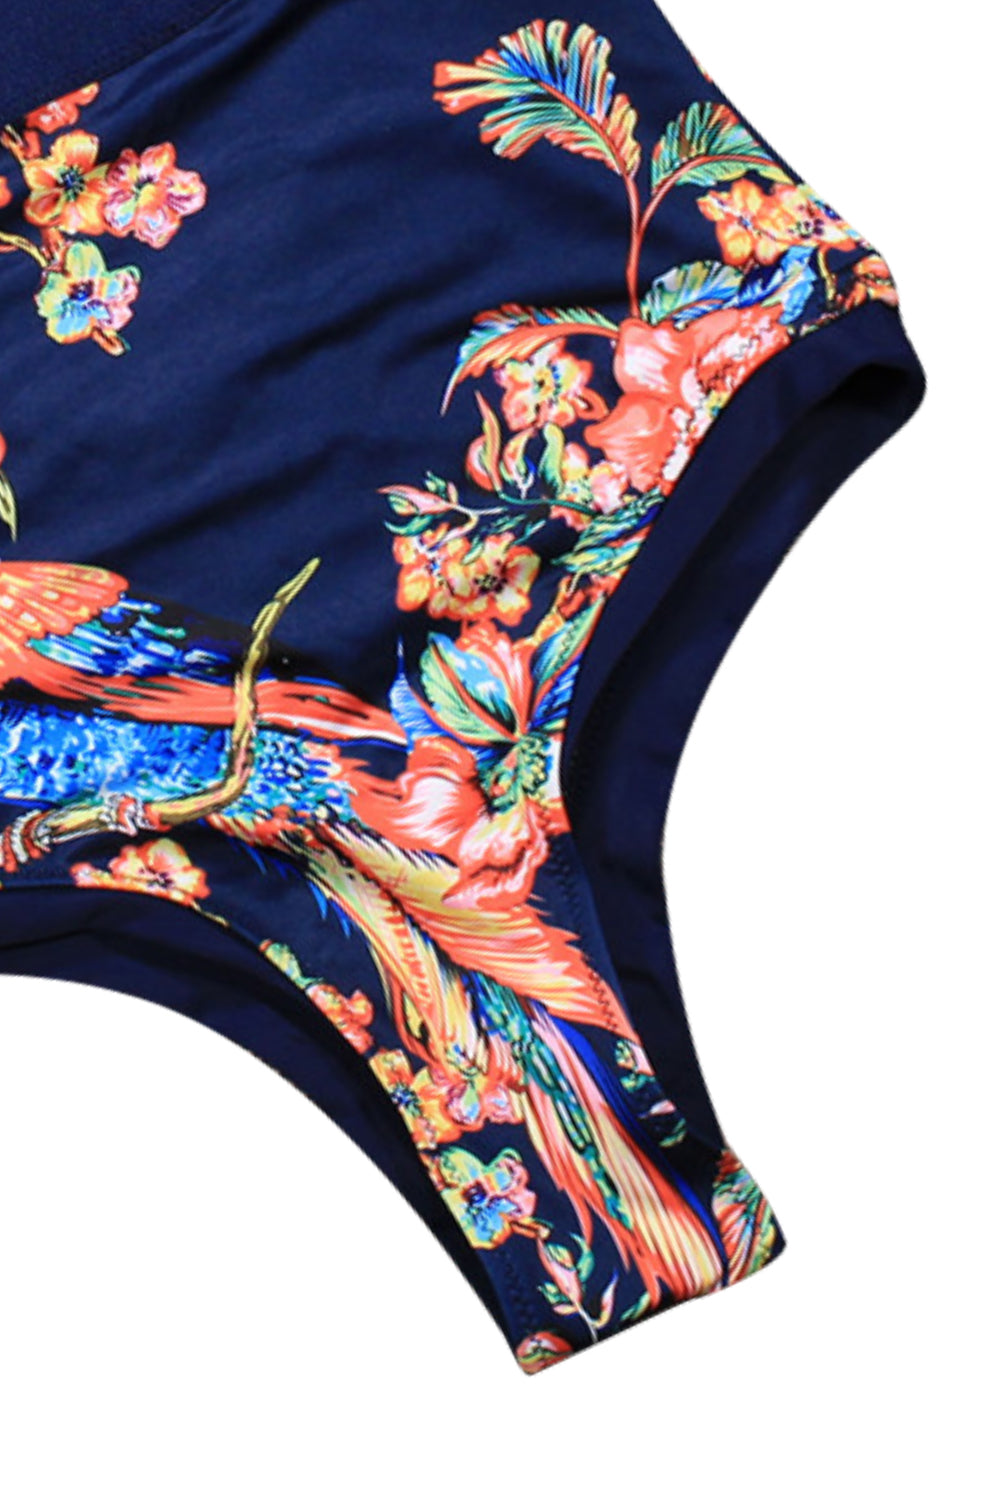 Iyasson Navy Blue Floral Print High-waisted One-piece Swimsuit